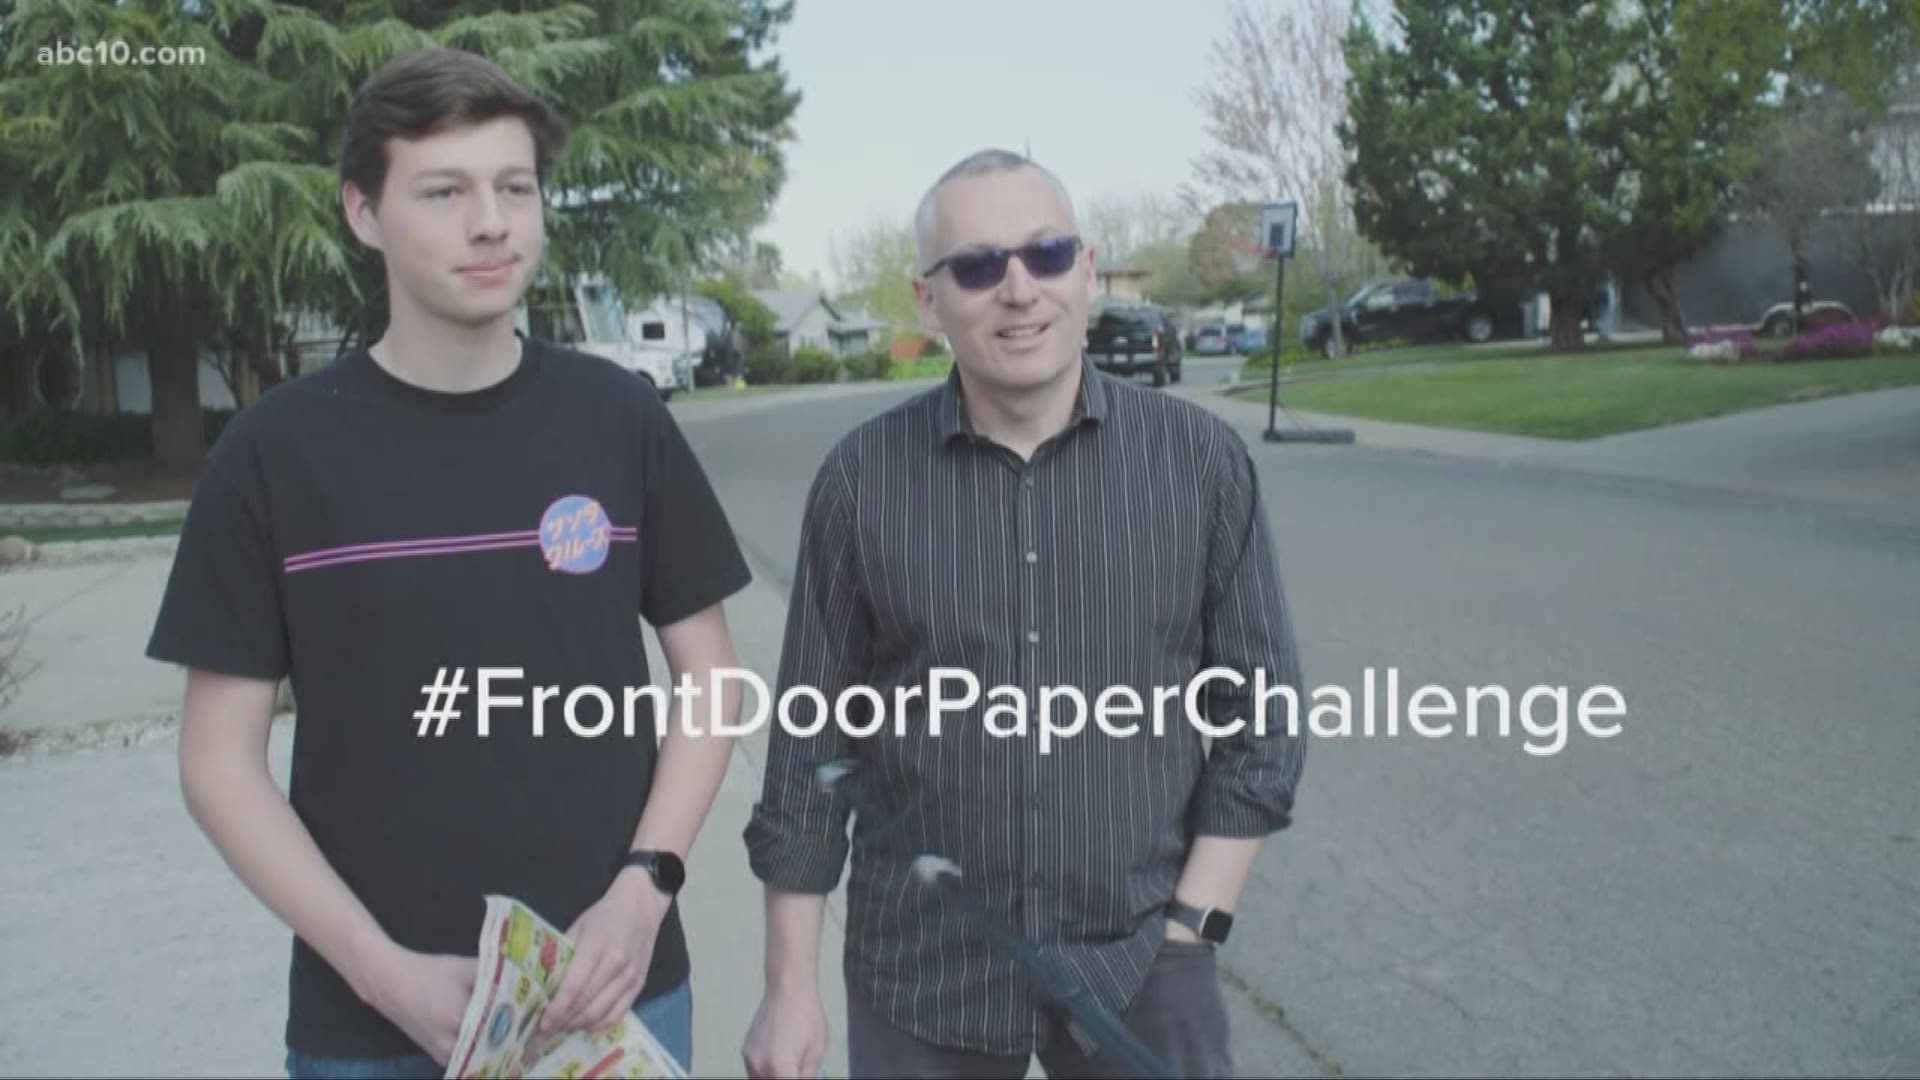 Amir and Kenan Cackovic are doing their part to help Fair Oaks neighbors during the coronavirus crisis by asking elderly residents to tape newspapers to their doors.